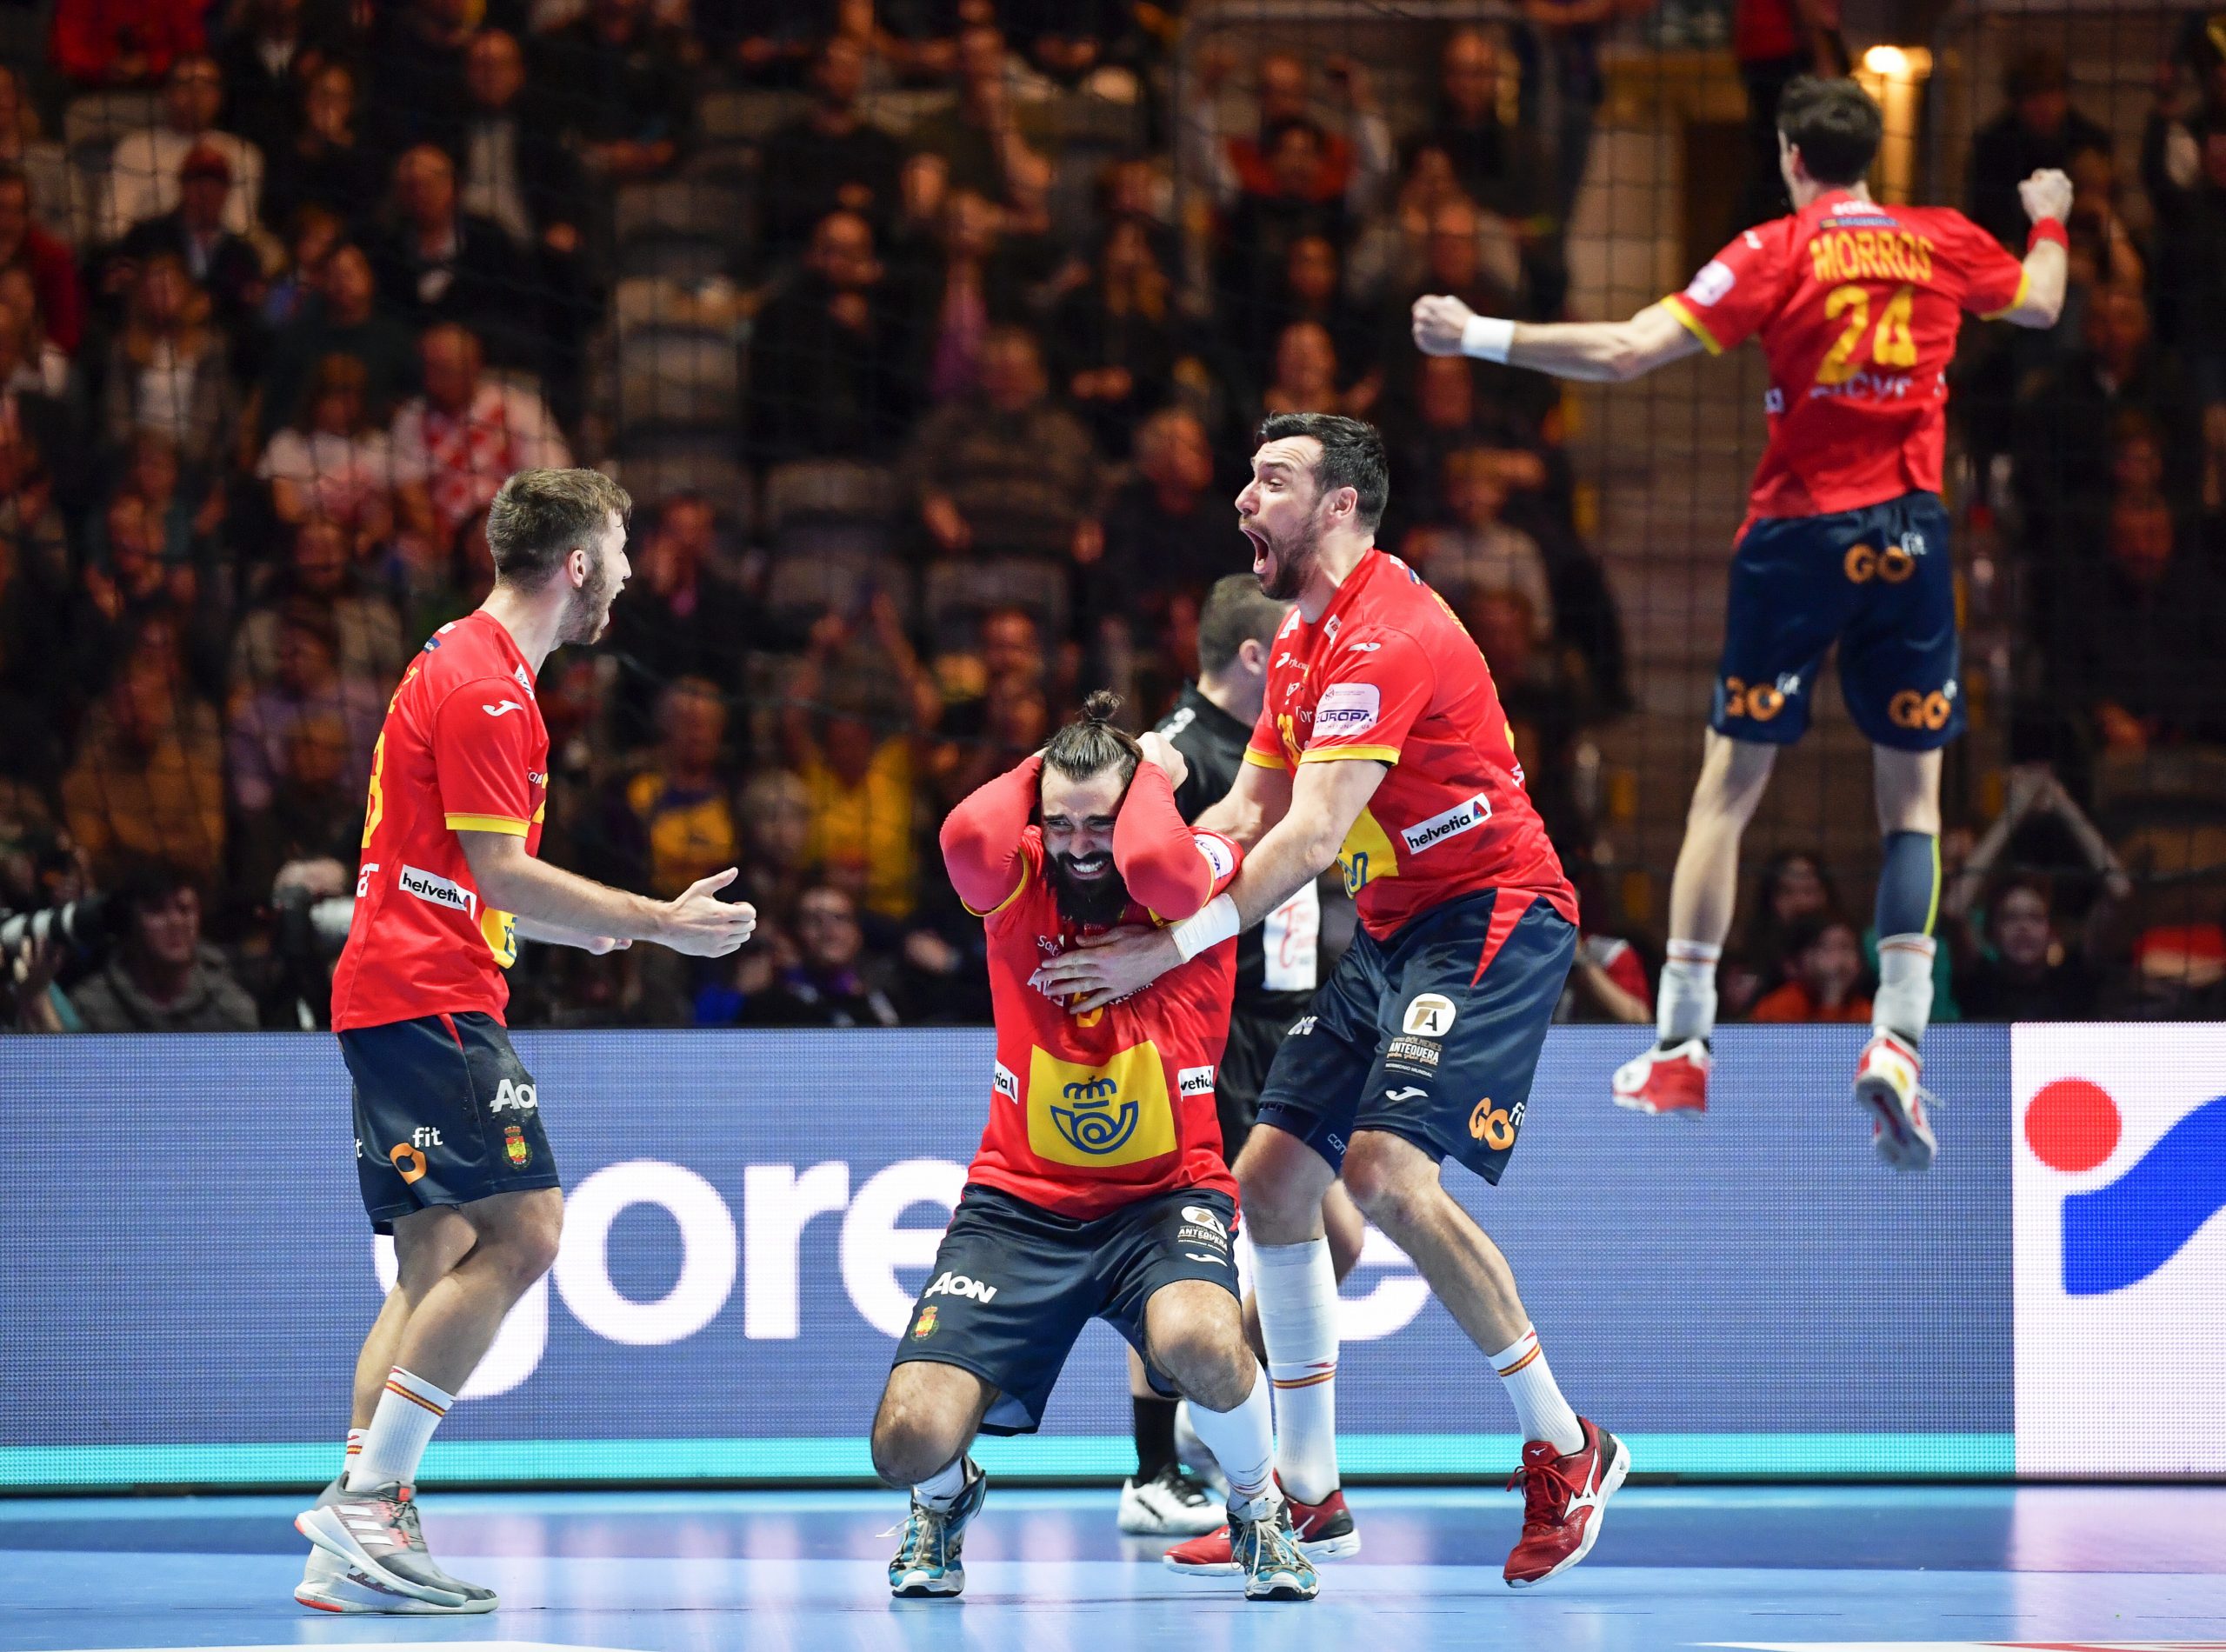 epa08167563 Spanish players celebrate after winning the Men's European Handball Championship final match between Spain and Croatia in Stockholm, Sweden, 26 January 2020.  EPA/ANDERS WIKLUND  SWEDEN OUT